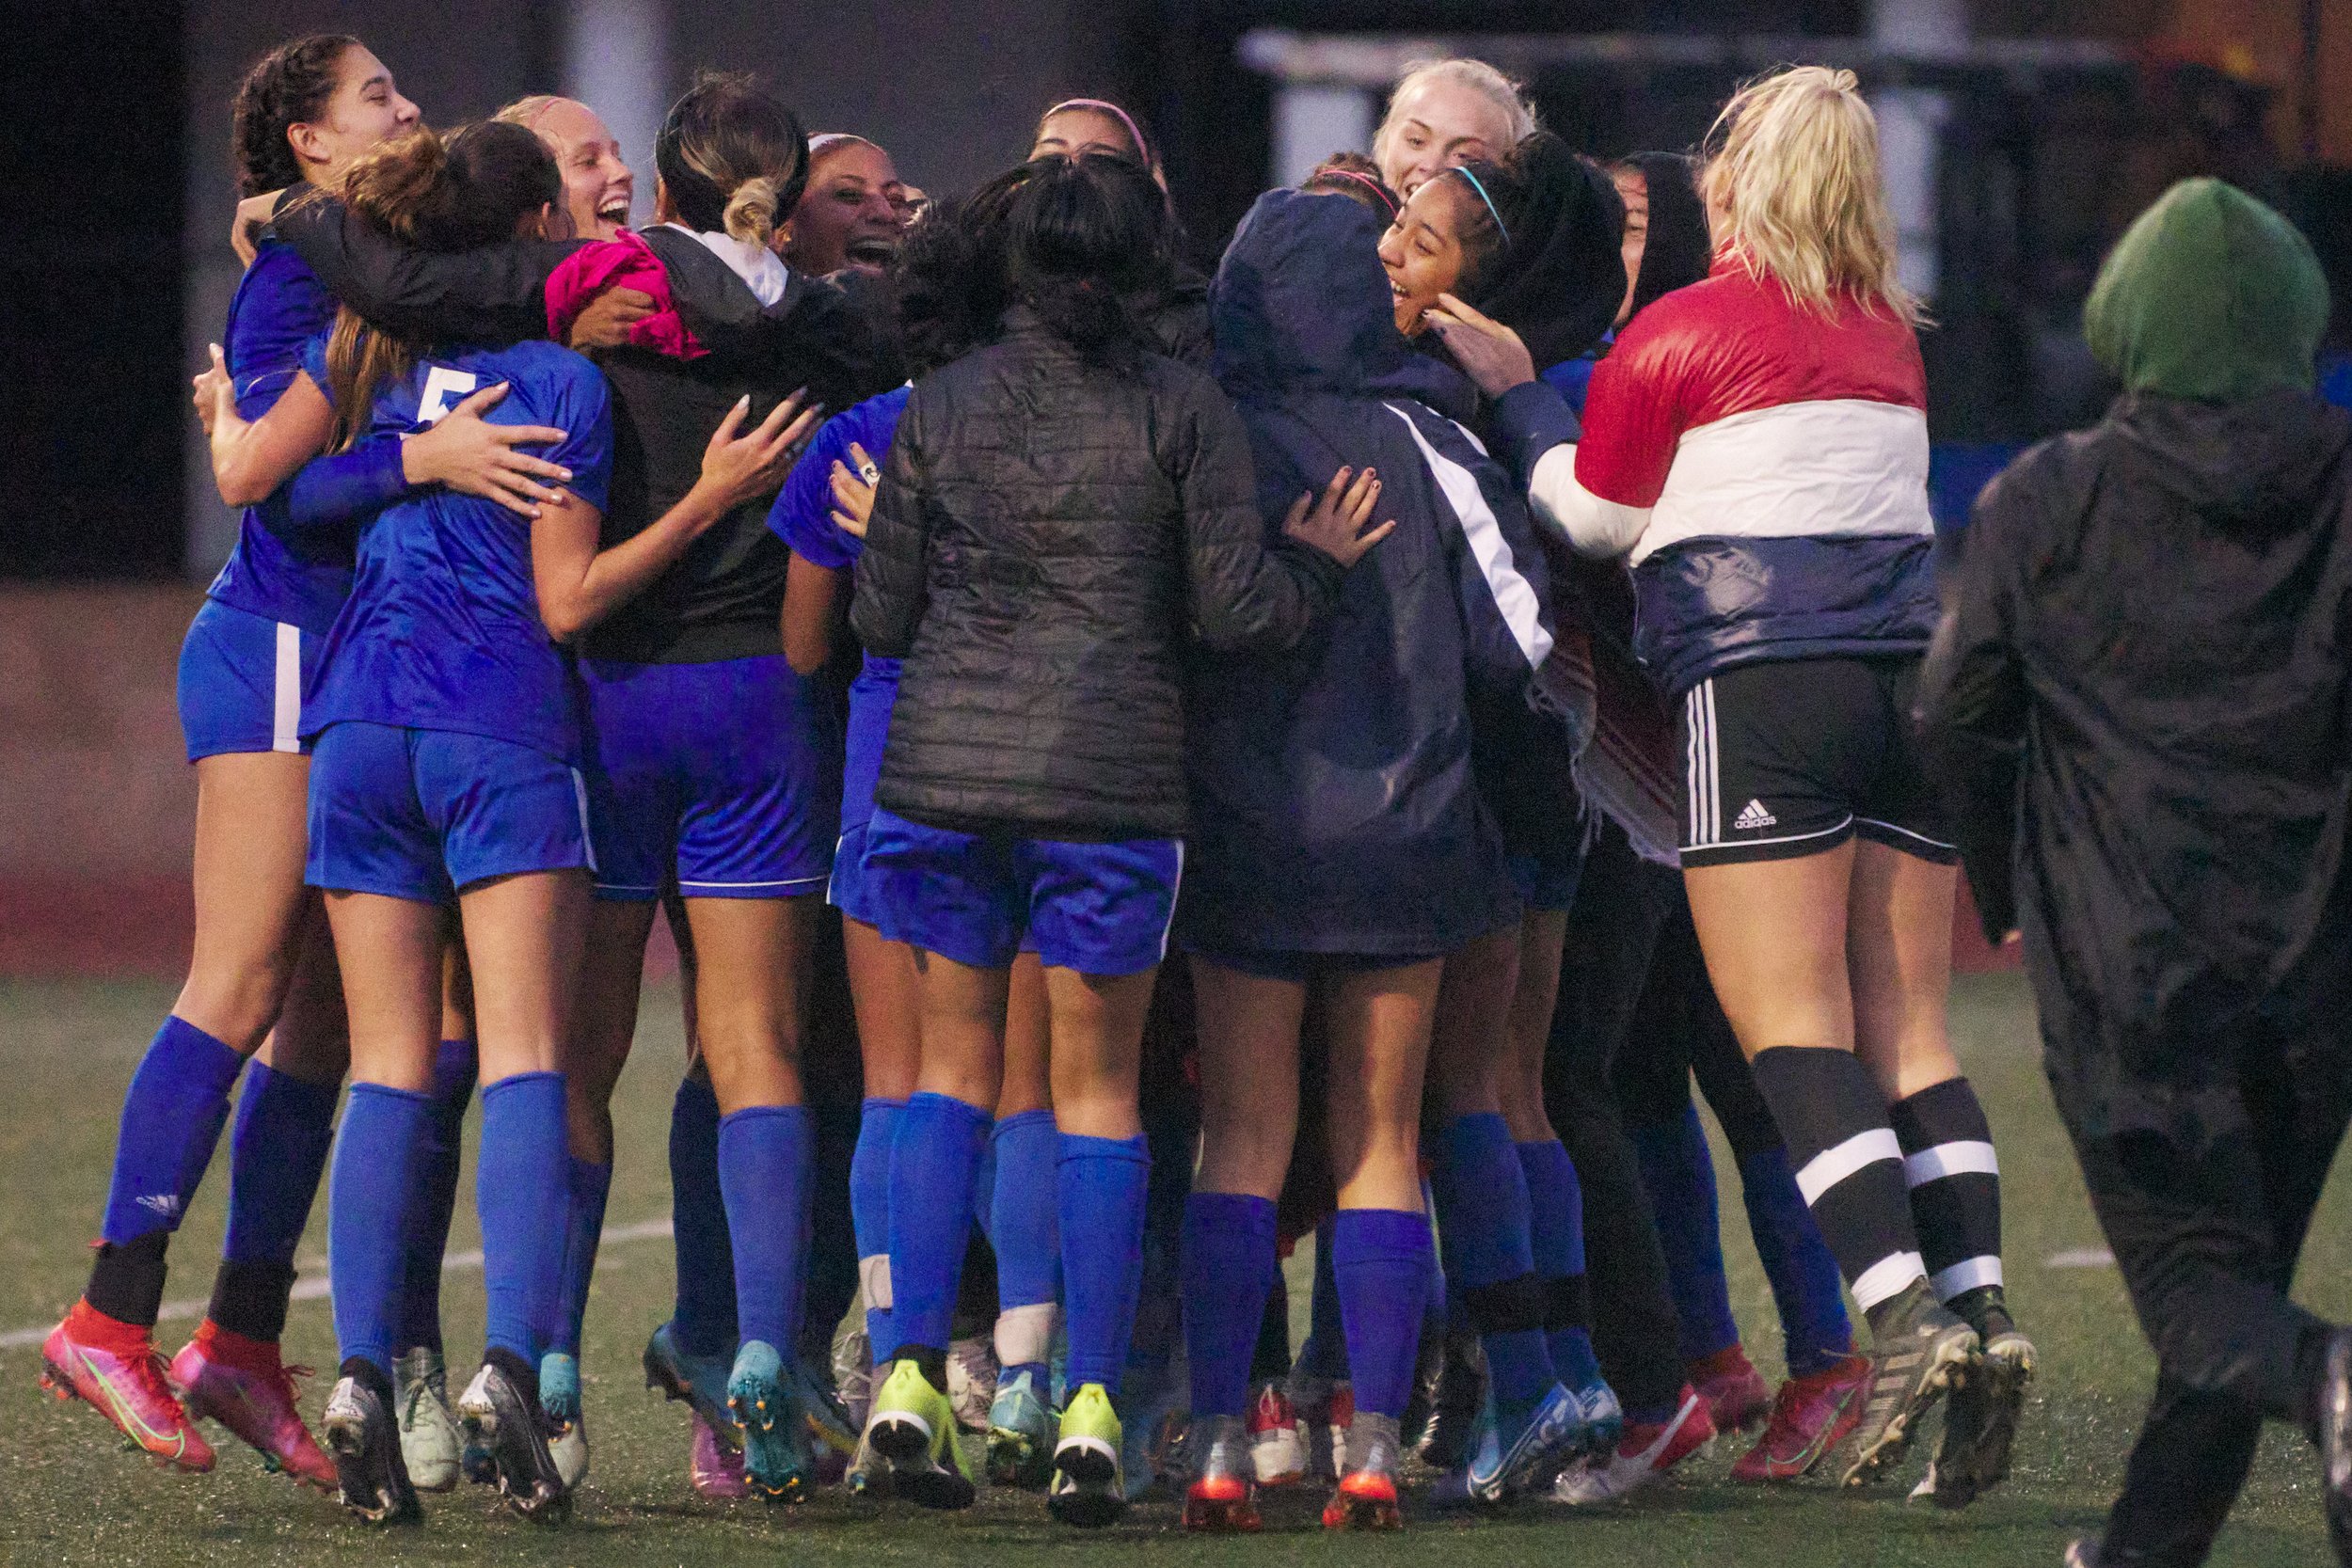  The Santa Monica College Corsairs Women's Soccer team celebrate their win with a big group hug at the end of the match against the Citrus College Owls on Tuesday, Nov. 8, 2022, at Corsair Field in Santa Monica, Calif. The Corsairs won 3-1. (Nicholas